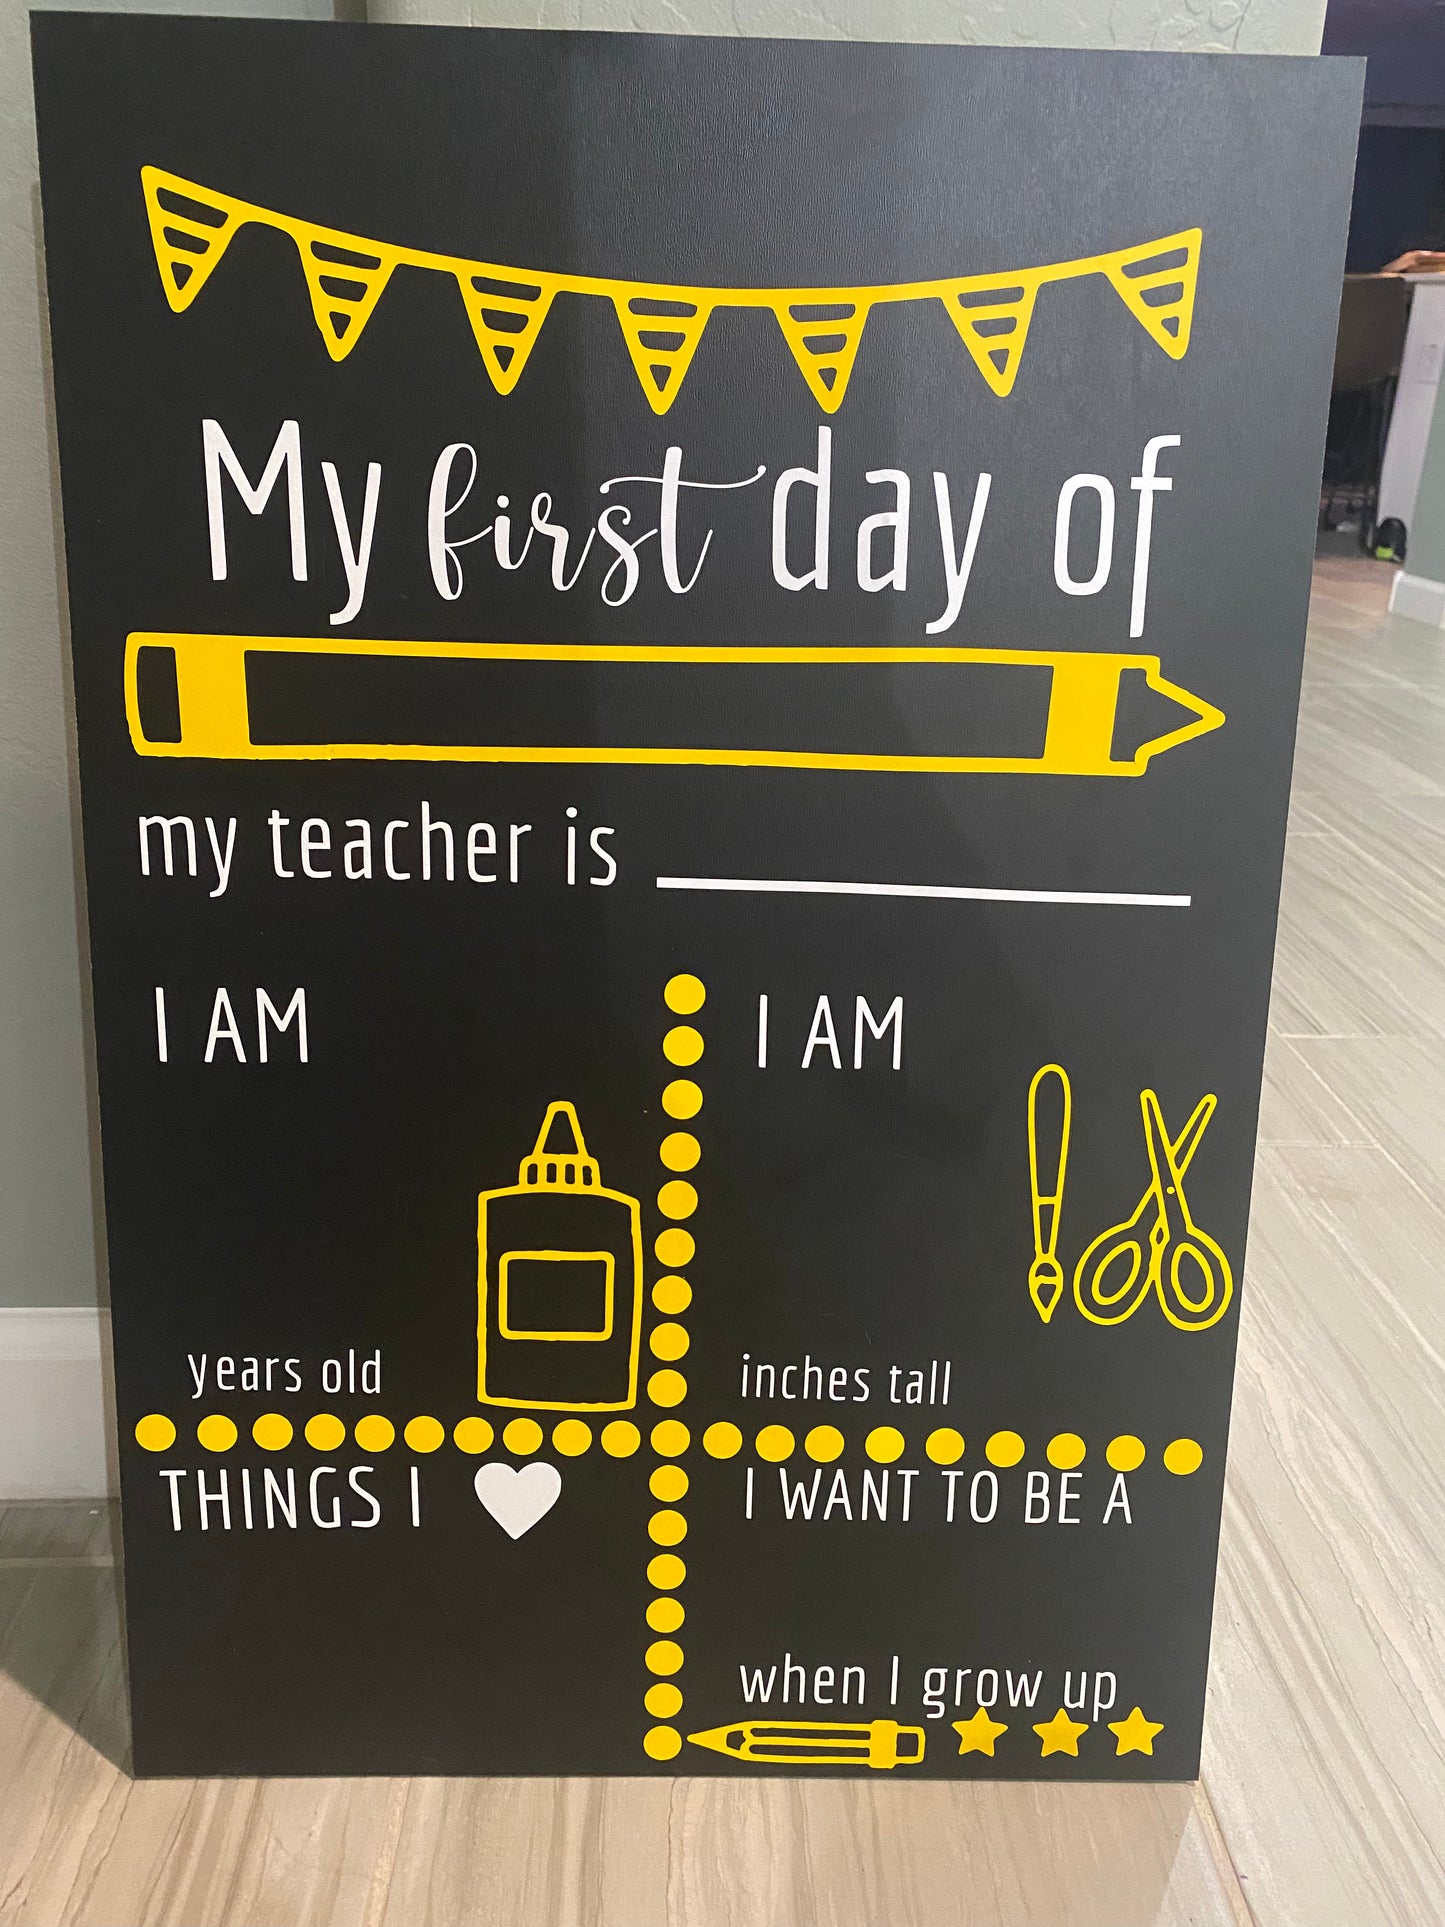 My first day of school- calkboard sign